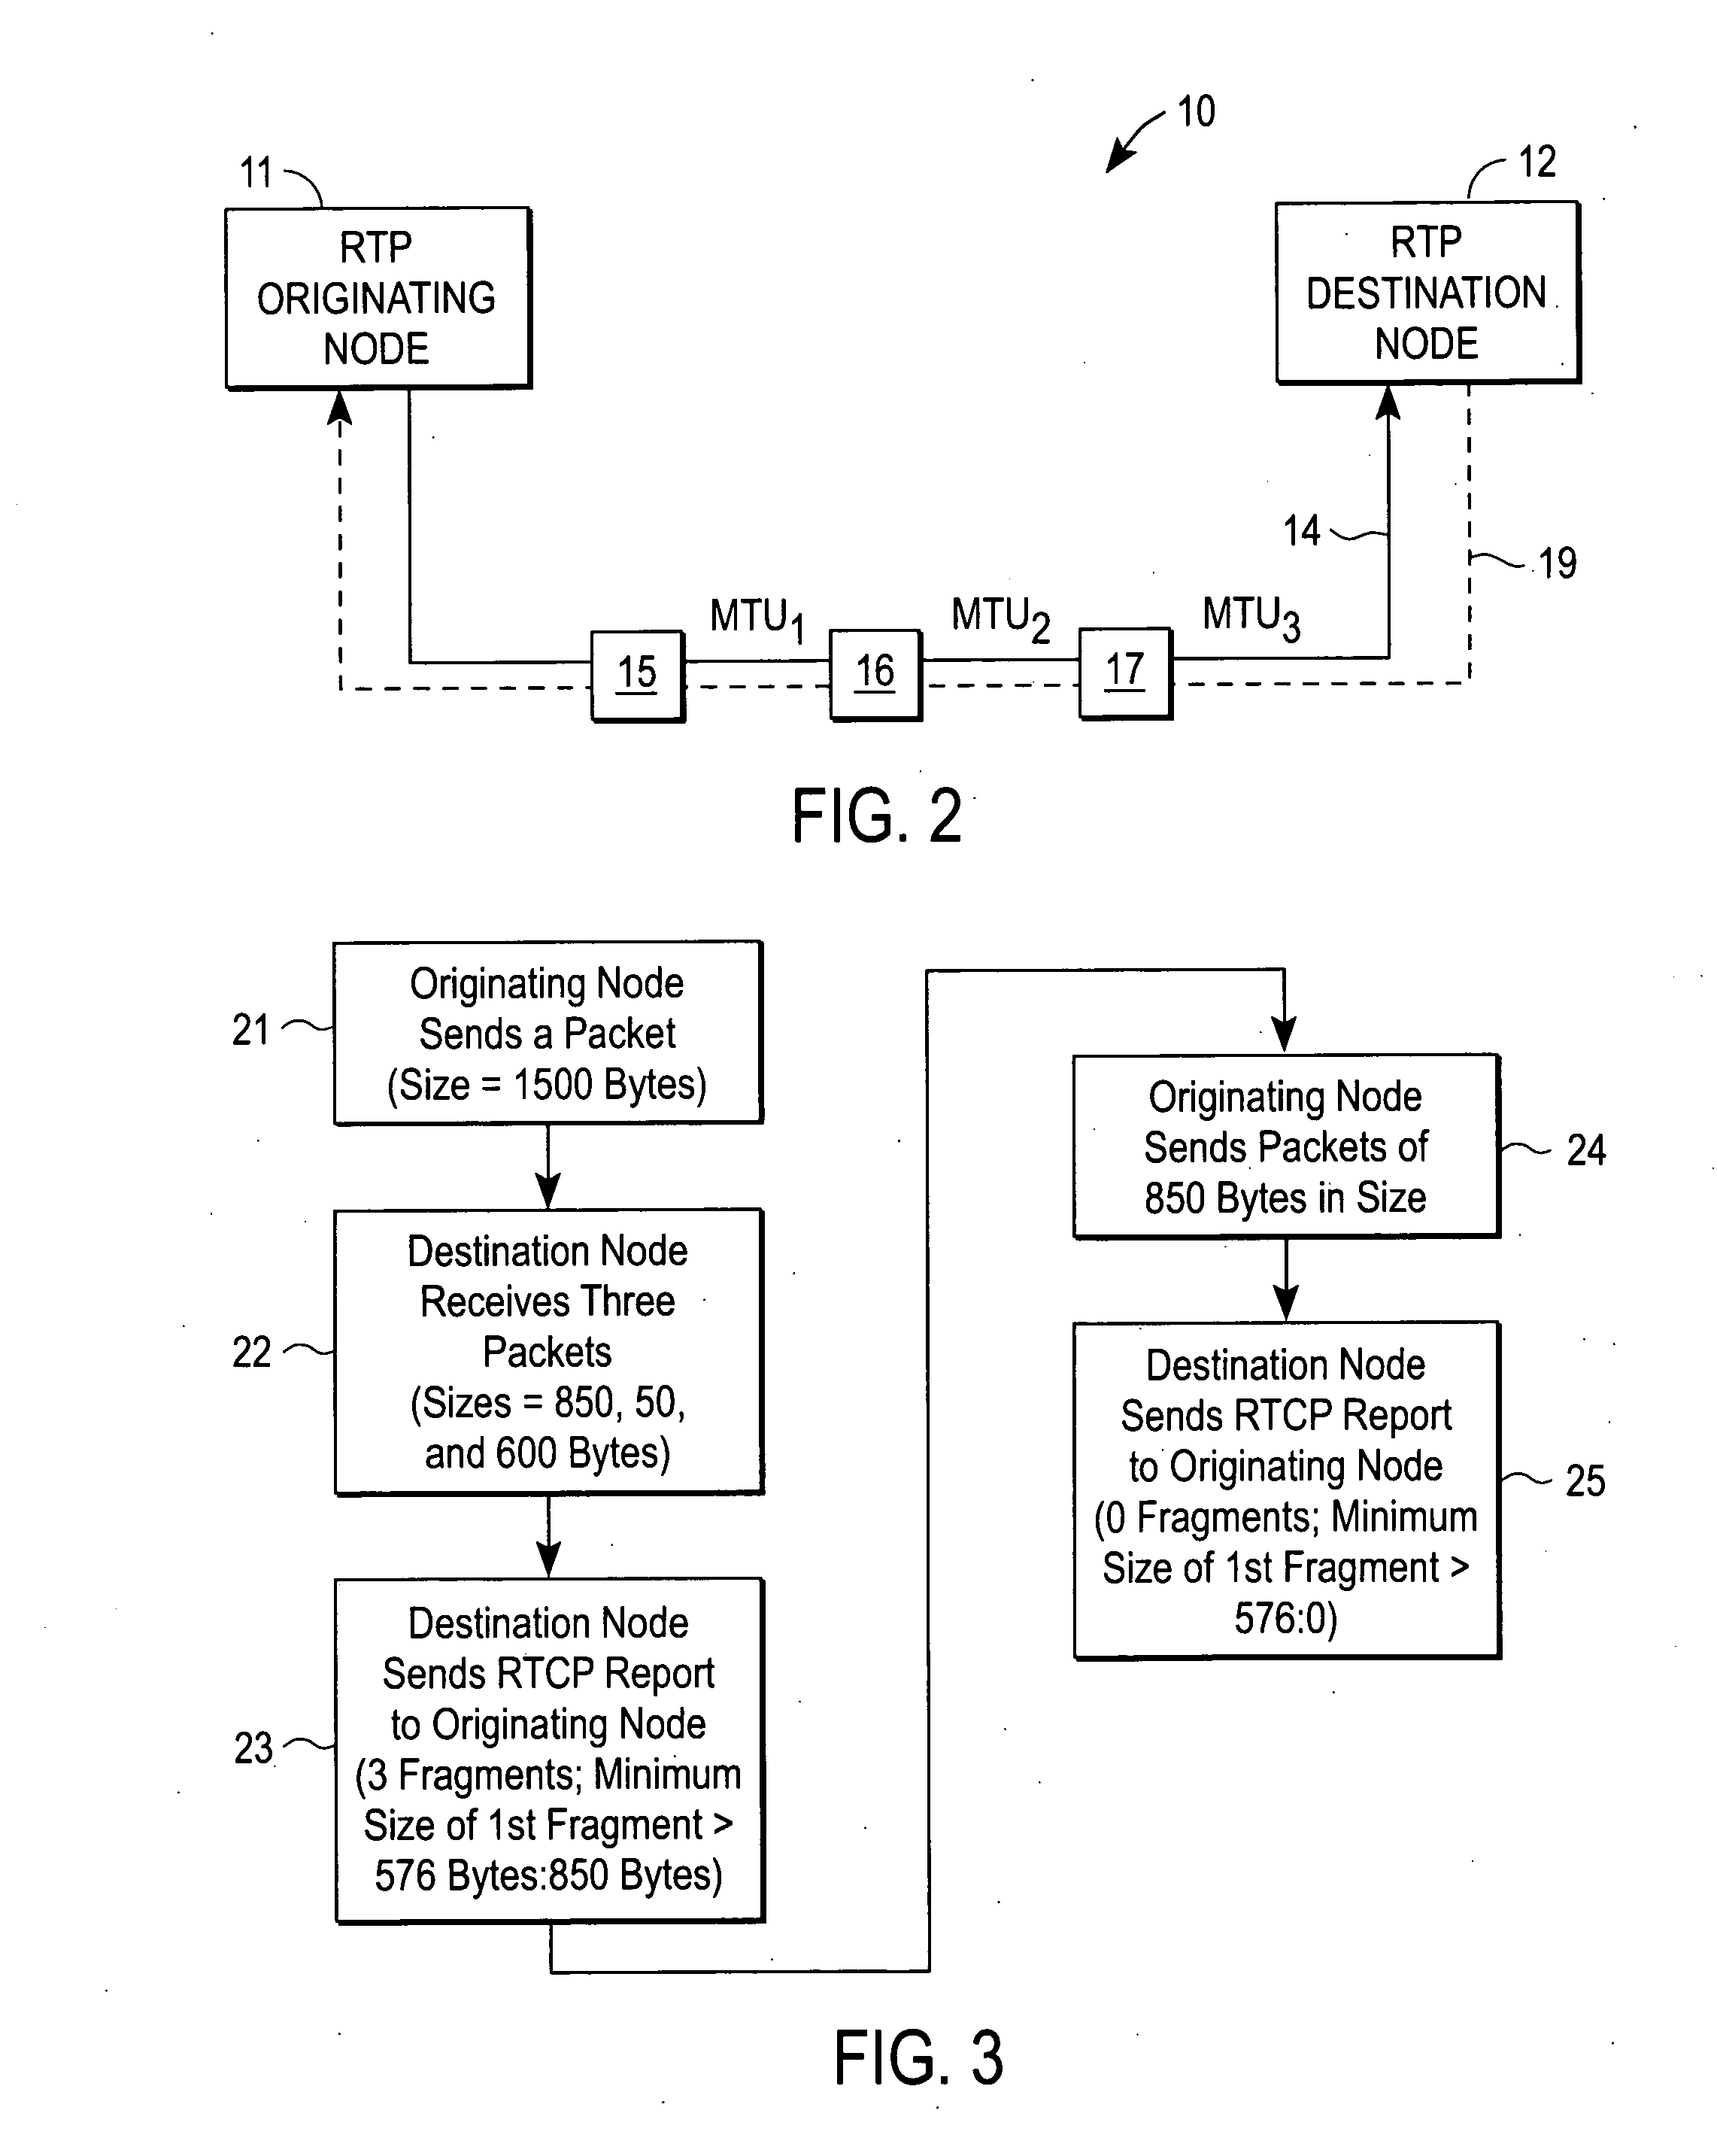 Maximum transmission unit tuning mechanism for a real-time transport protocol stream